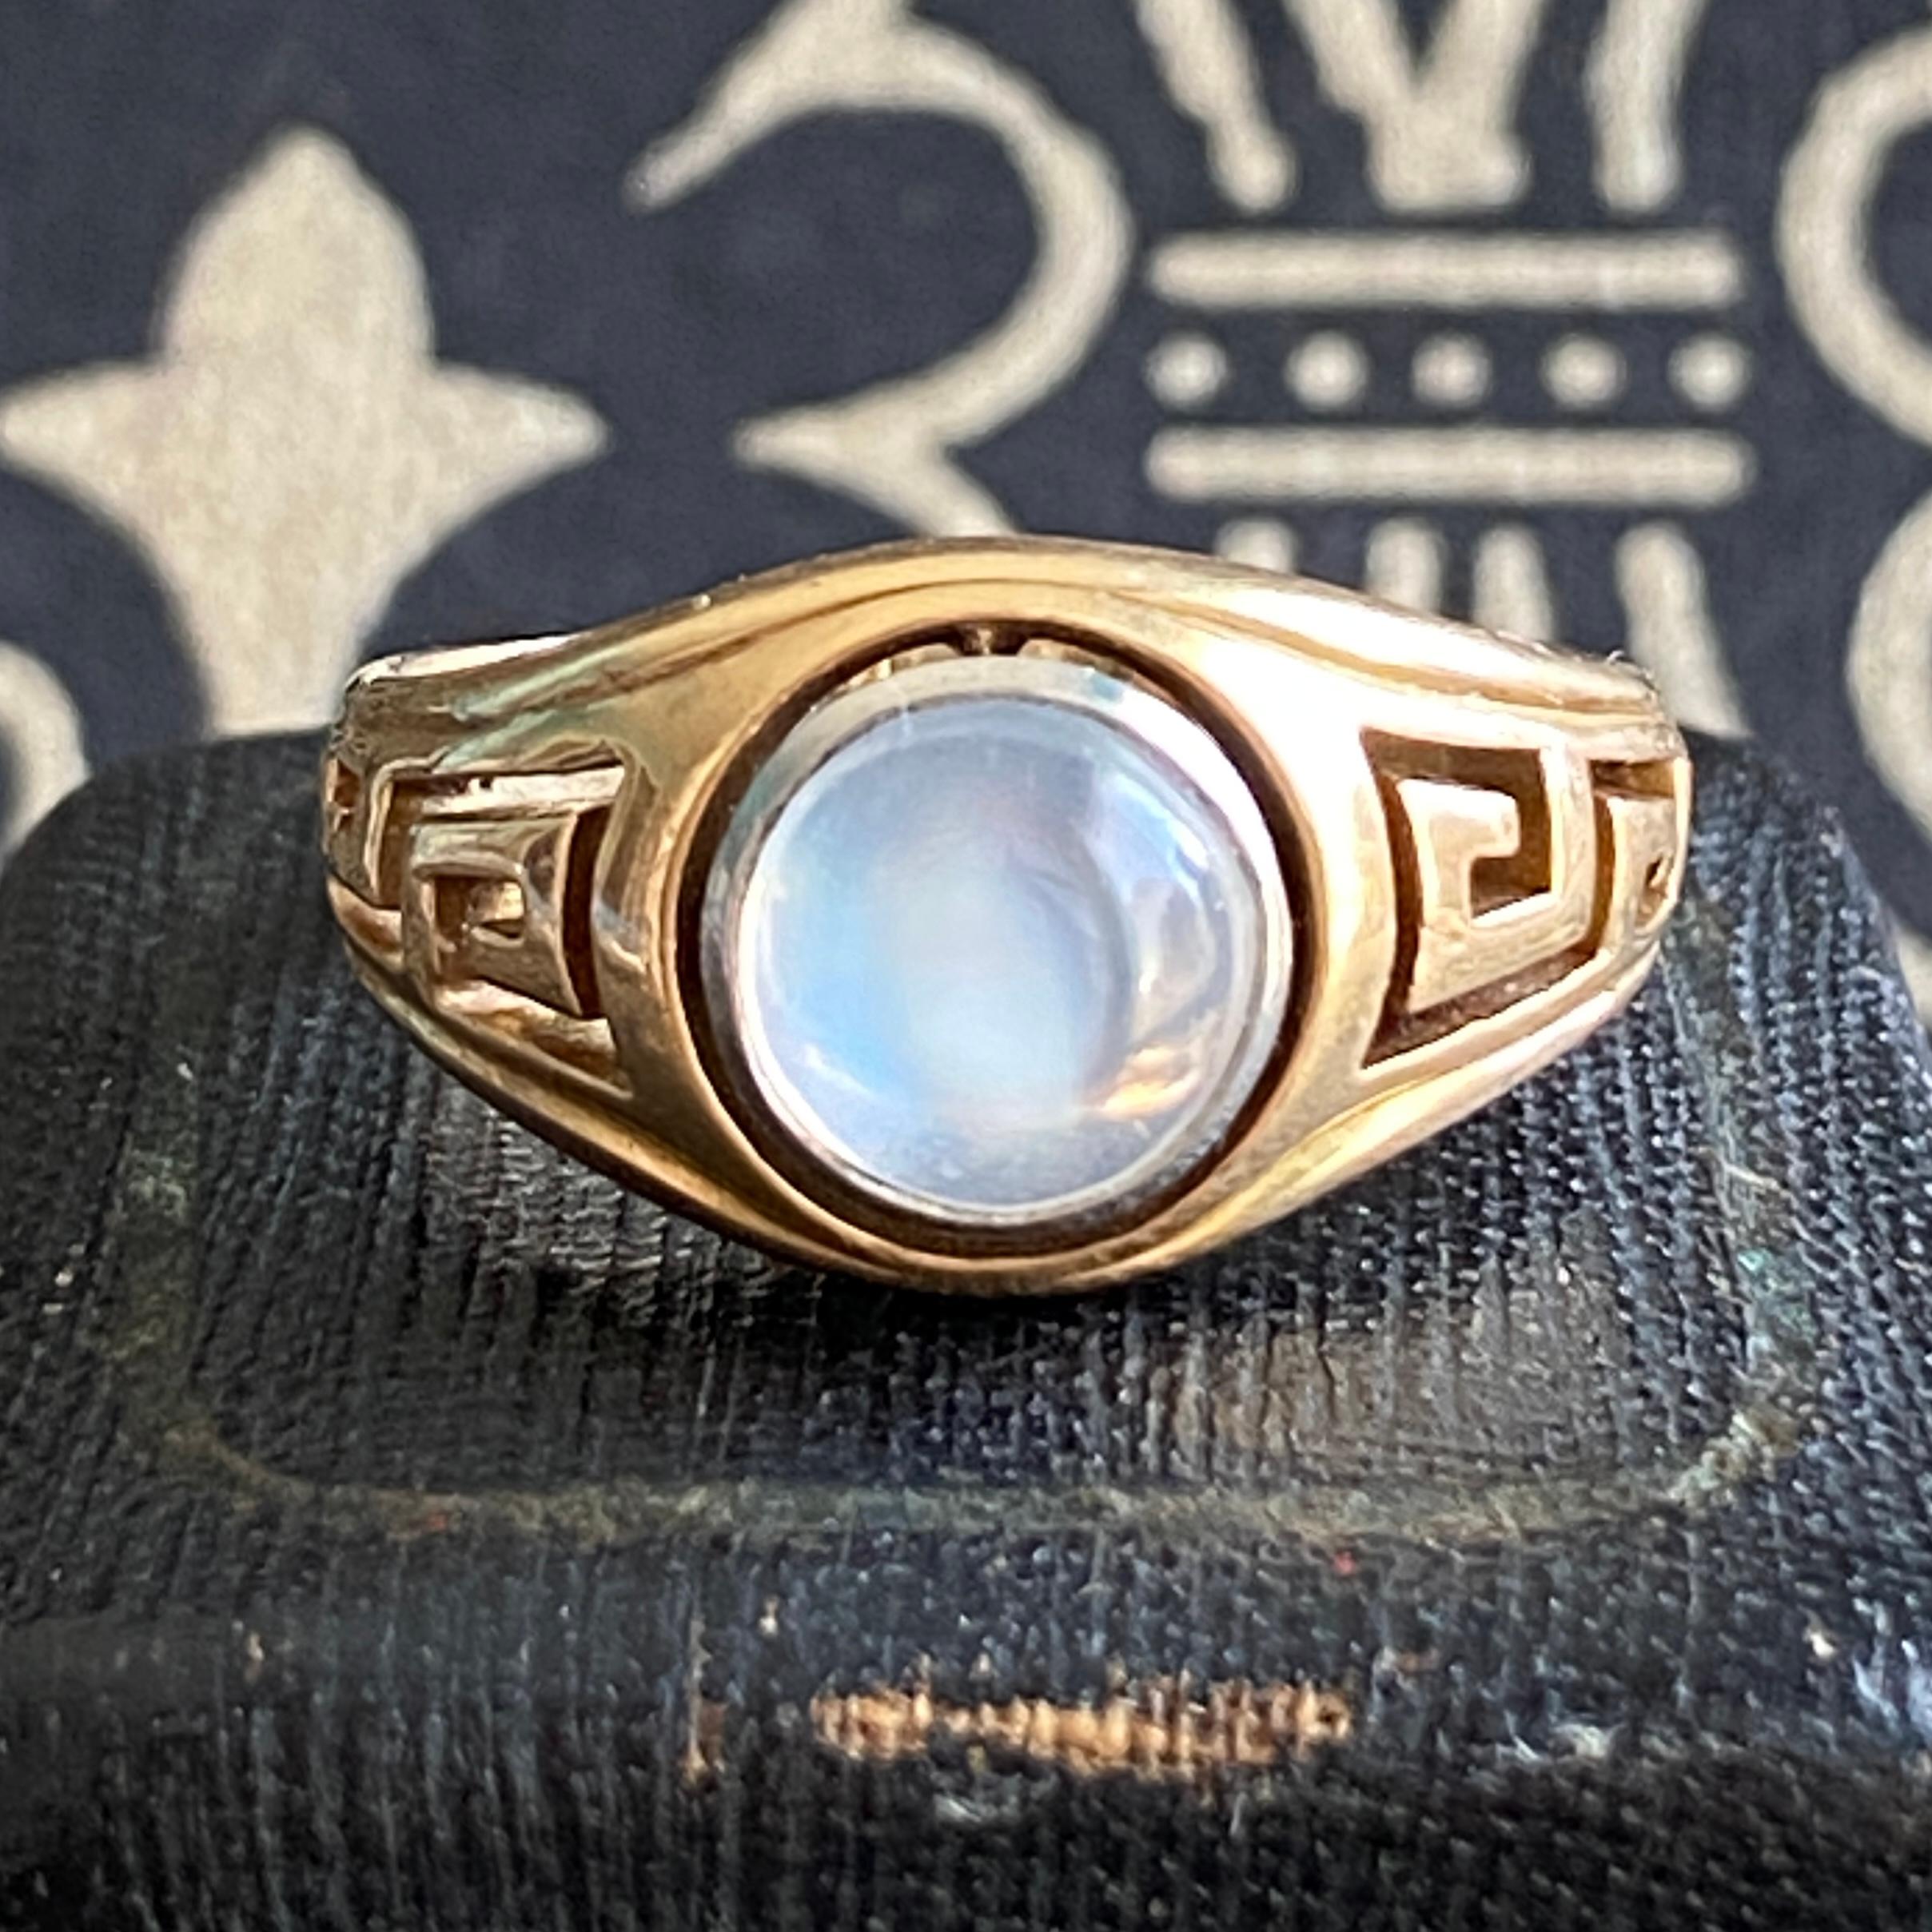 Details:
Awesome vintage greek moonstone ring. Both shoulders have pierced greek key work. Around the center is also pierced half circles. This surrounds a stunning moonstone! There is so much life and glow to this stone. A fine A grade example.